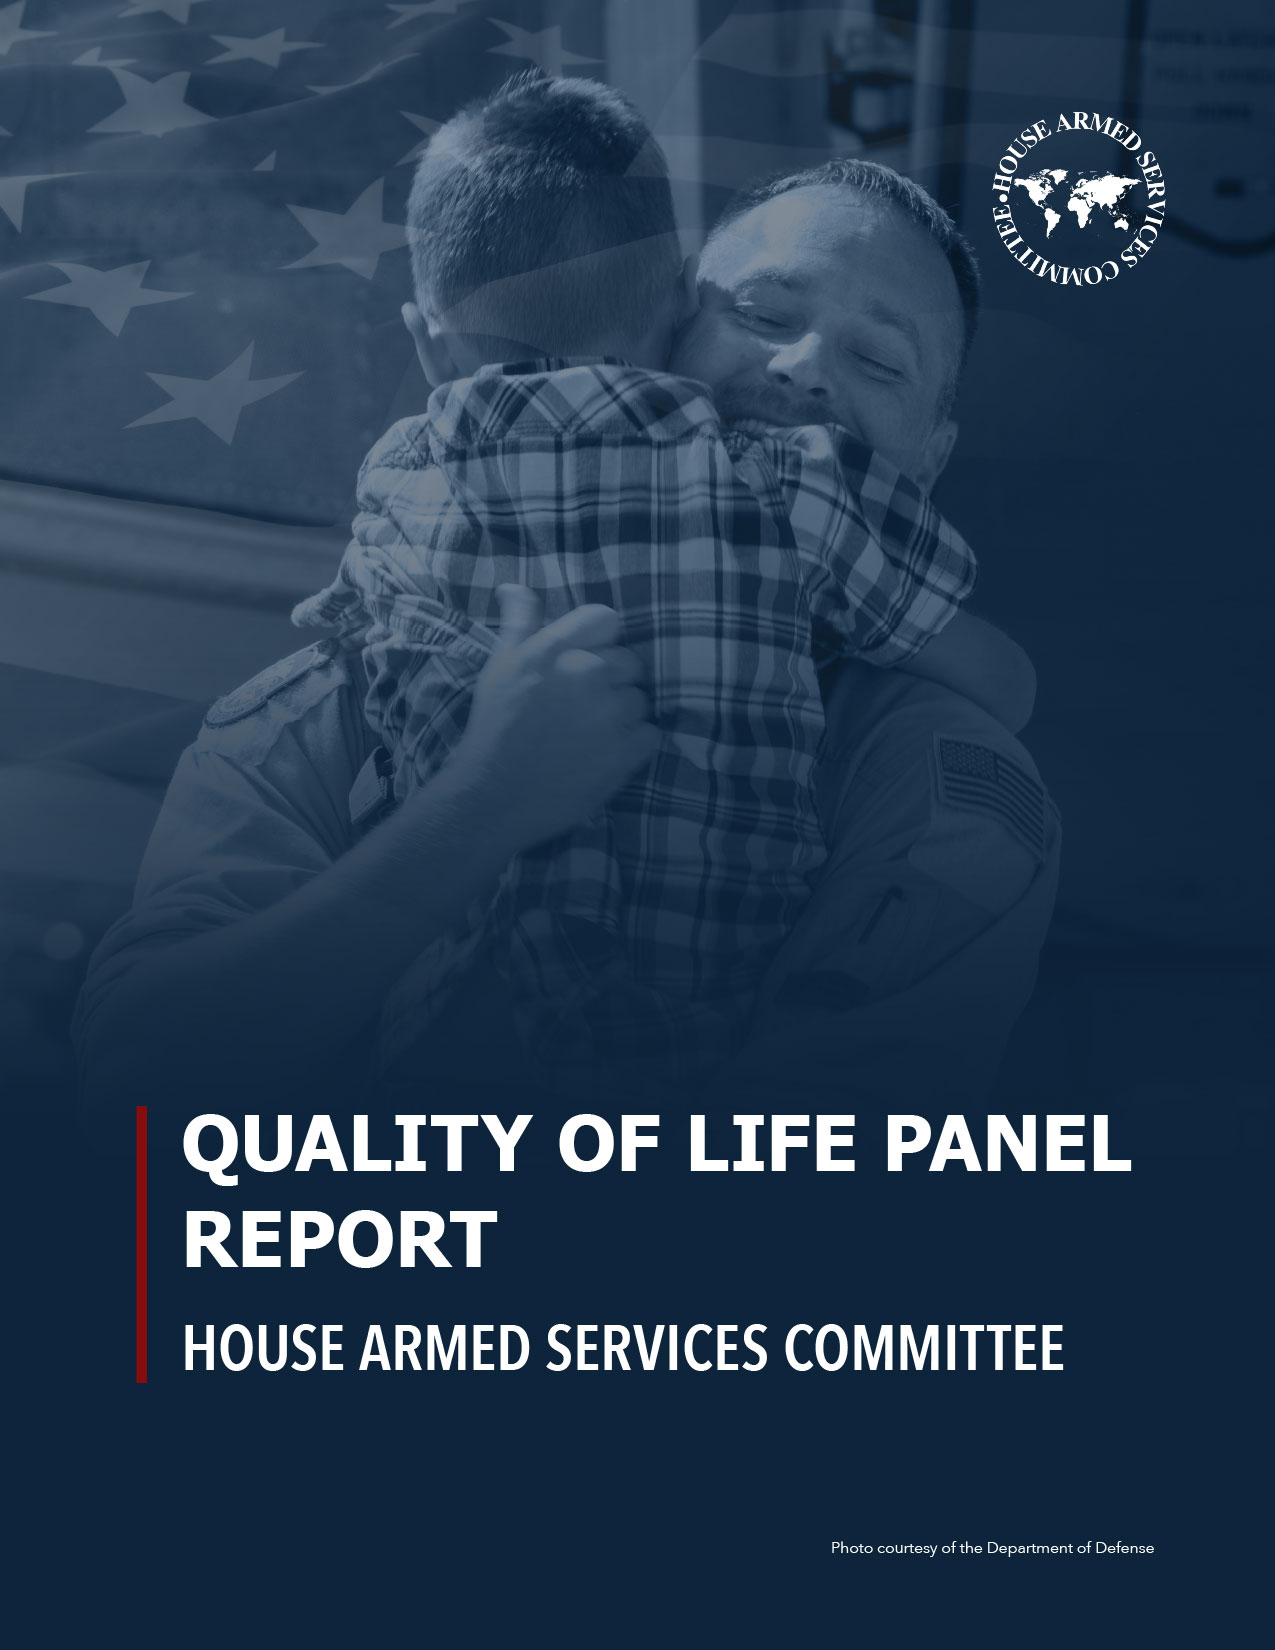 Quality of Life Panel Report - House Armed Services Committee